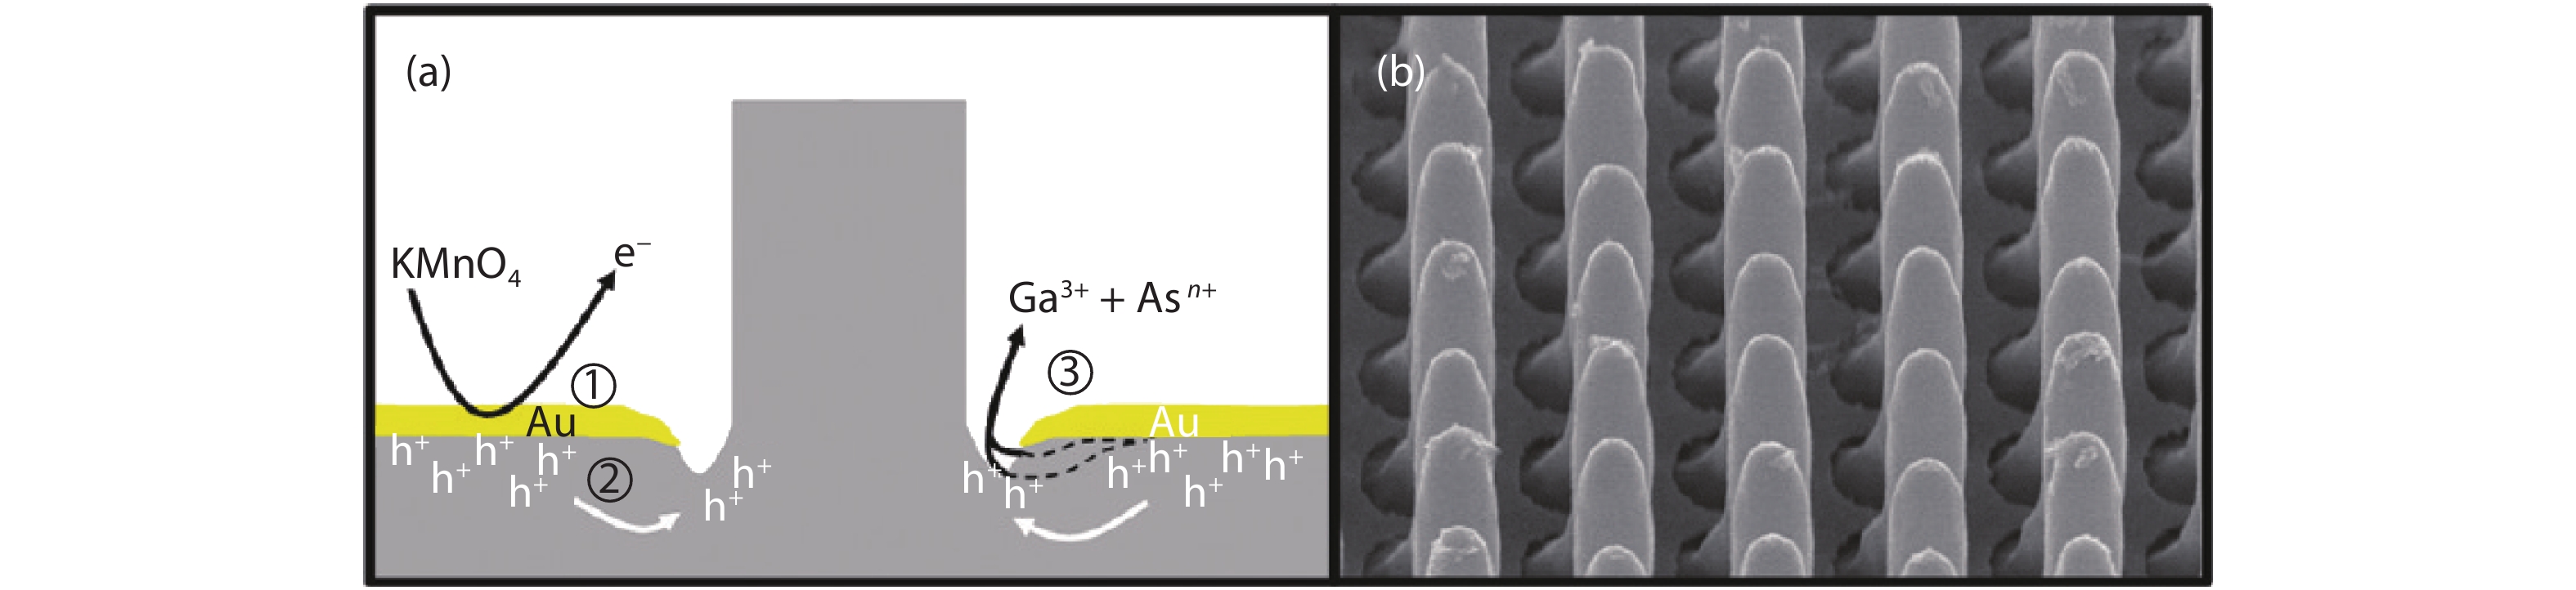 (Color online) (a) Schematic illustrations of the formation mechanism of GaAs NWs. (b) SEM images of high aspect ratio GaAs NW produced from a 600 nm wide square Au mesh pattern in H2SO4 and KMnO4 solution at 40–45 °C. Reprinted from Ref. [9] with permission, Copyright 2011, American Chemical Society.